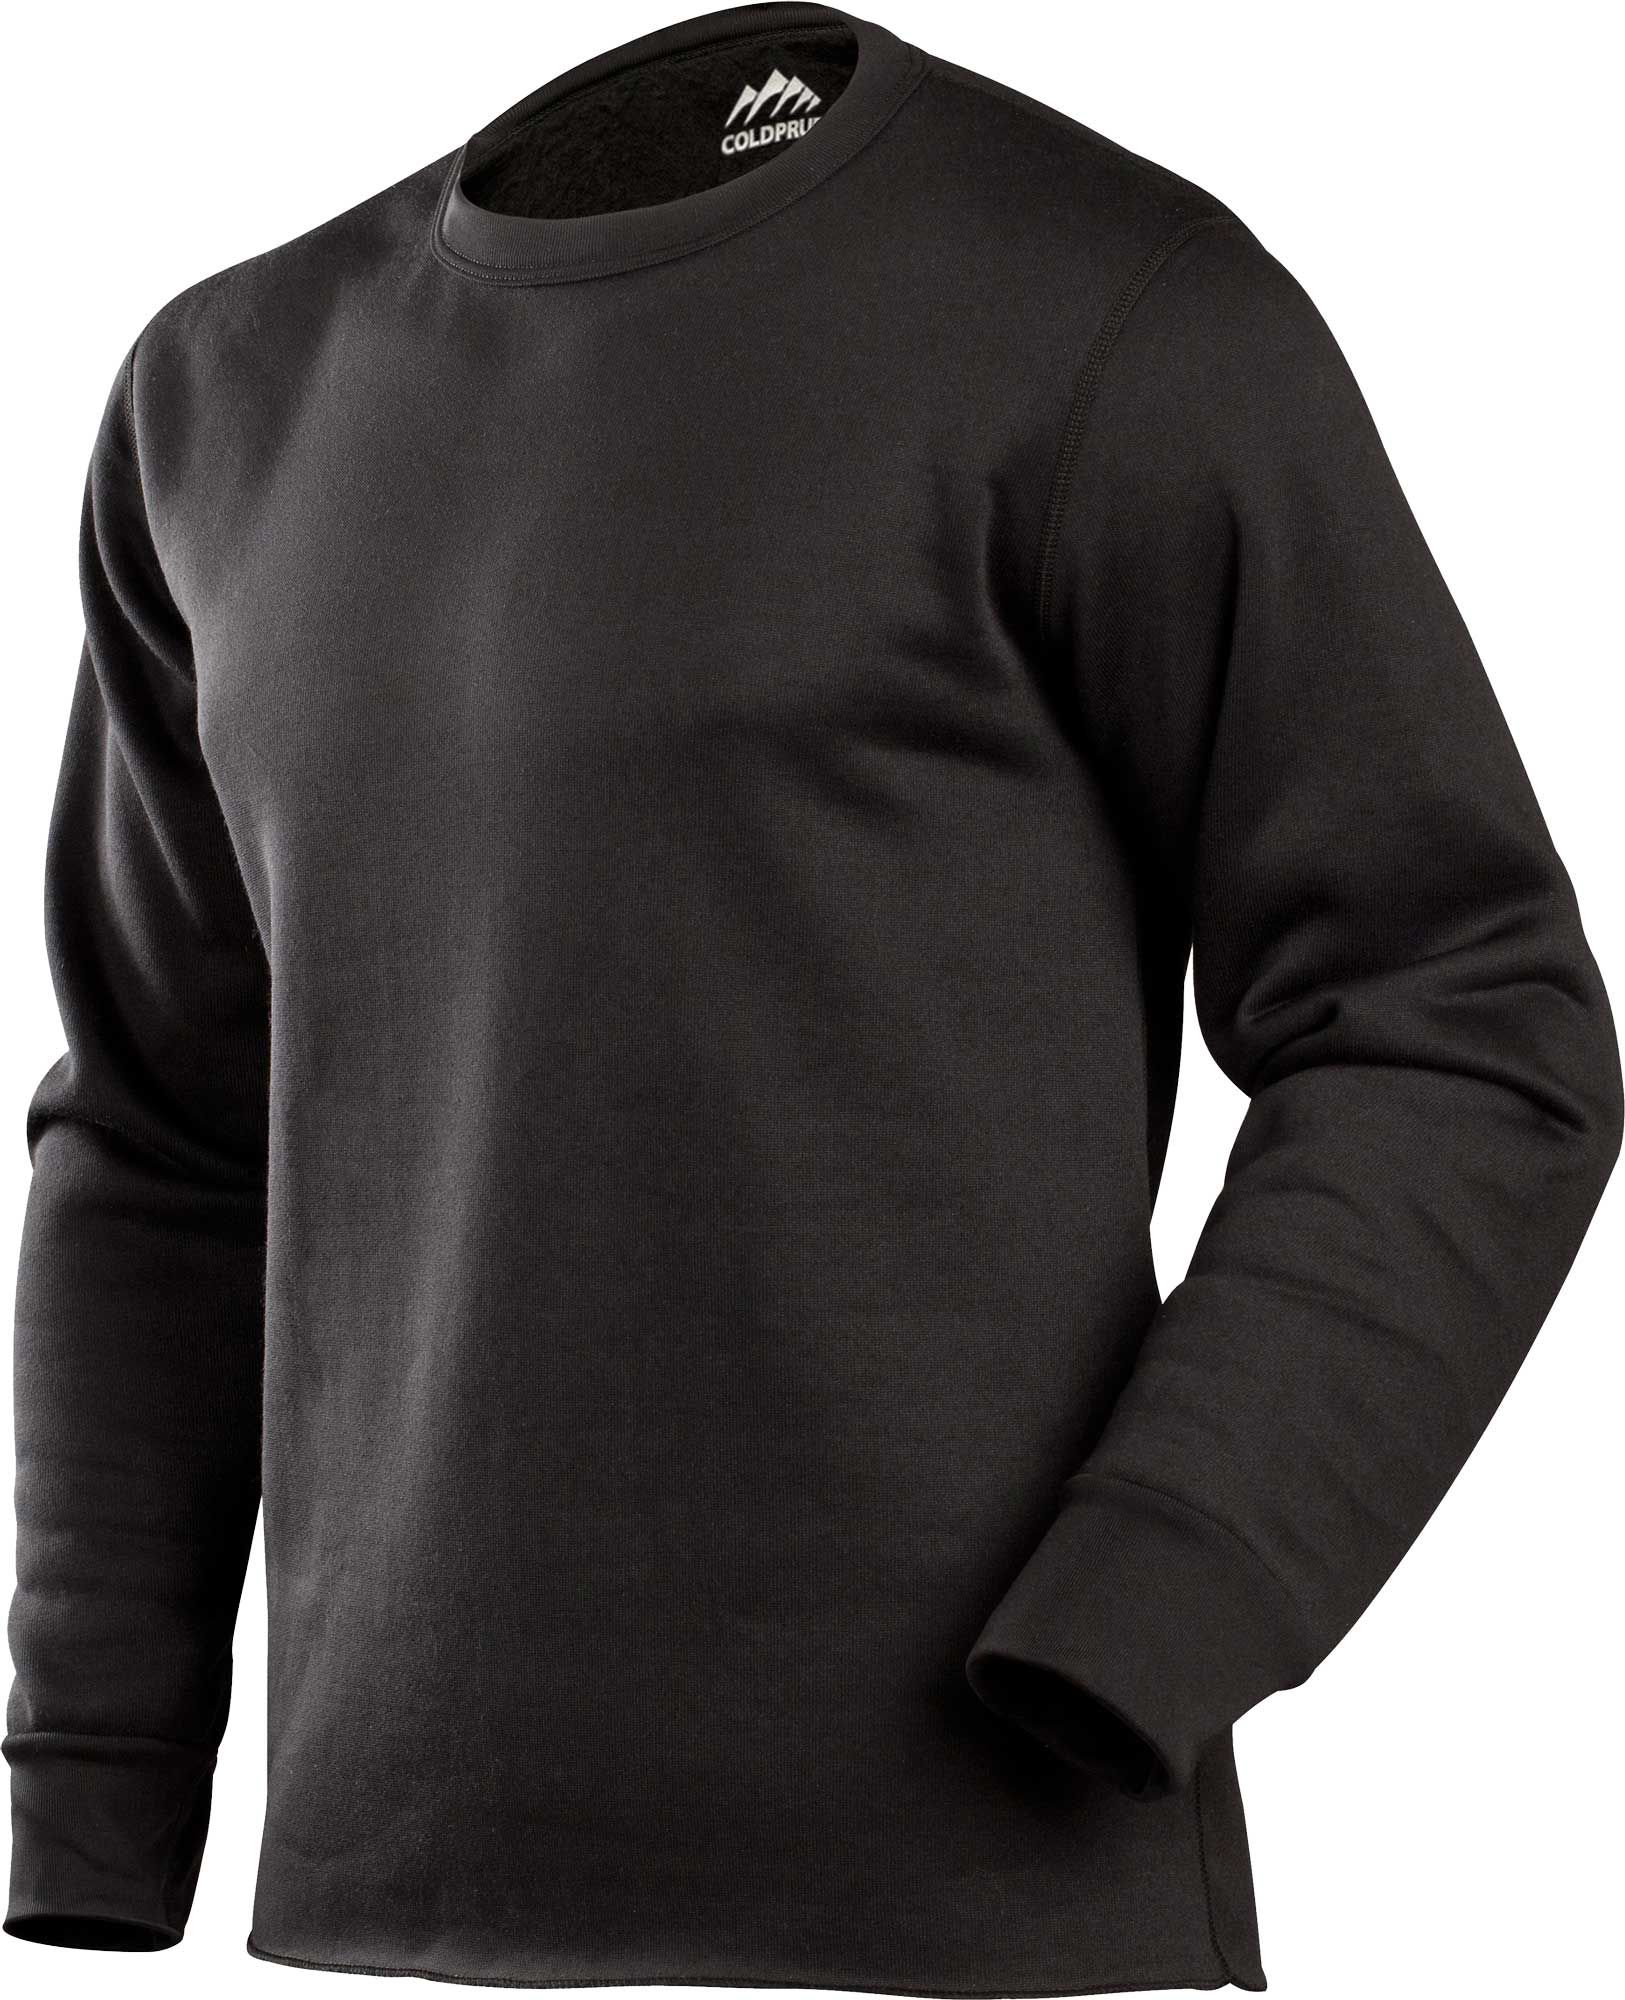 ColdPruf Men's Expedition Long Sleeve Crew Base Layer Shirt